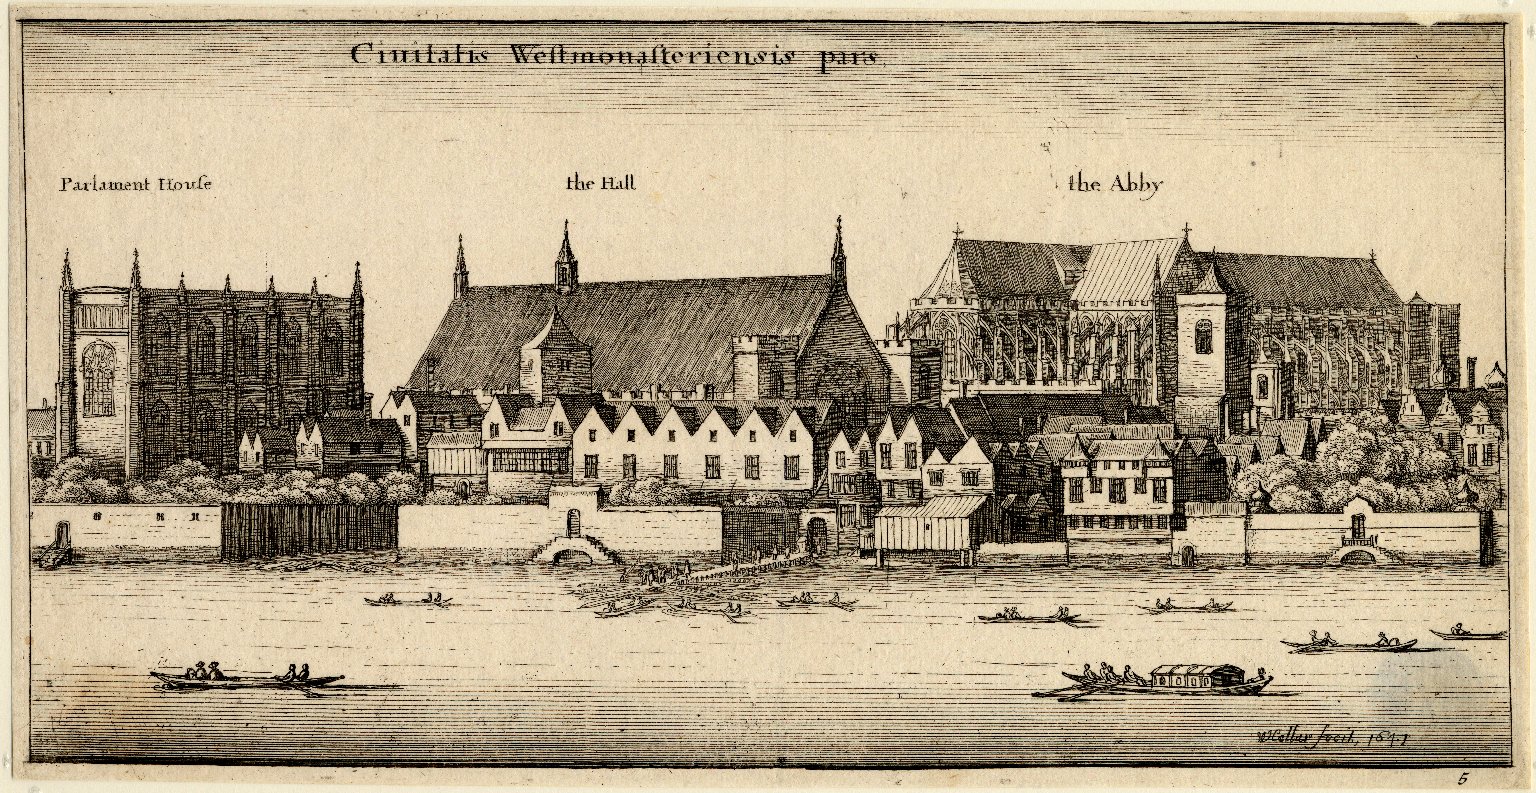 View of Westminster from the River Thames by Wenceslaus Hollar. Image courtesy of the Folger Digital Image Collection.